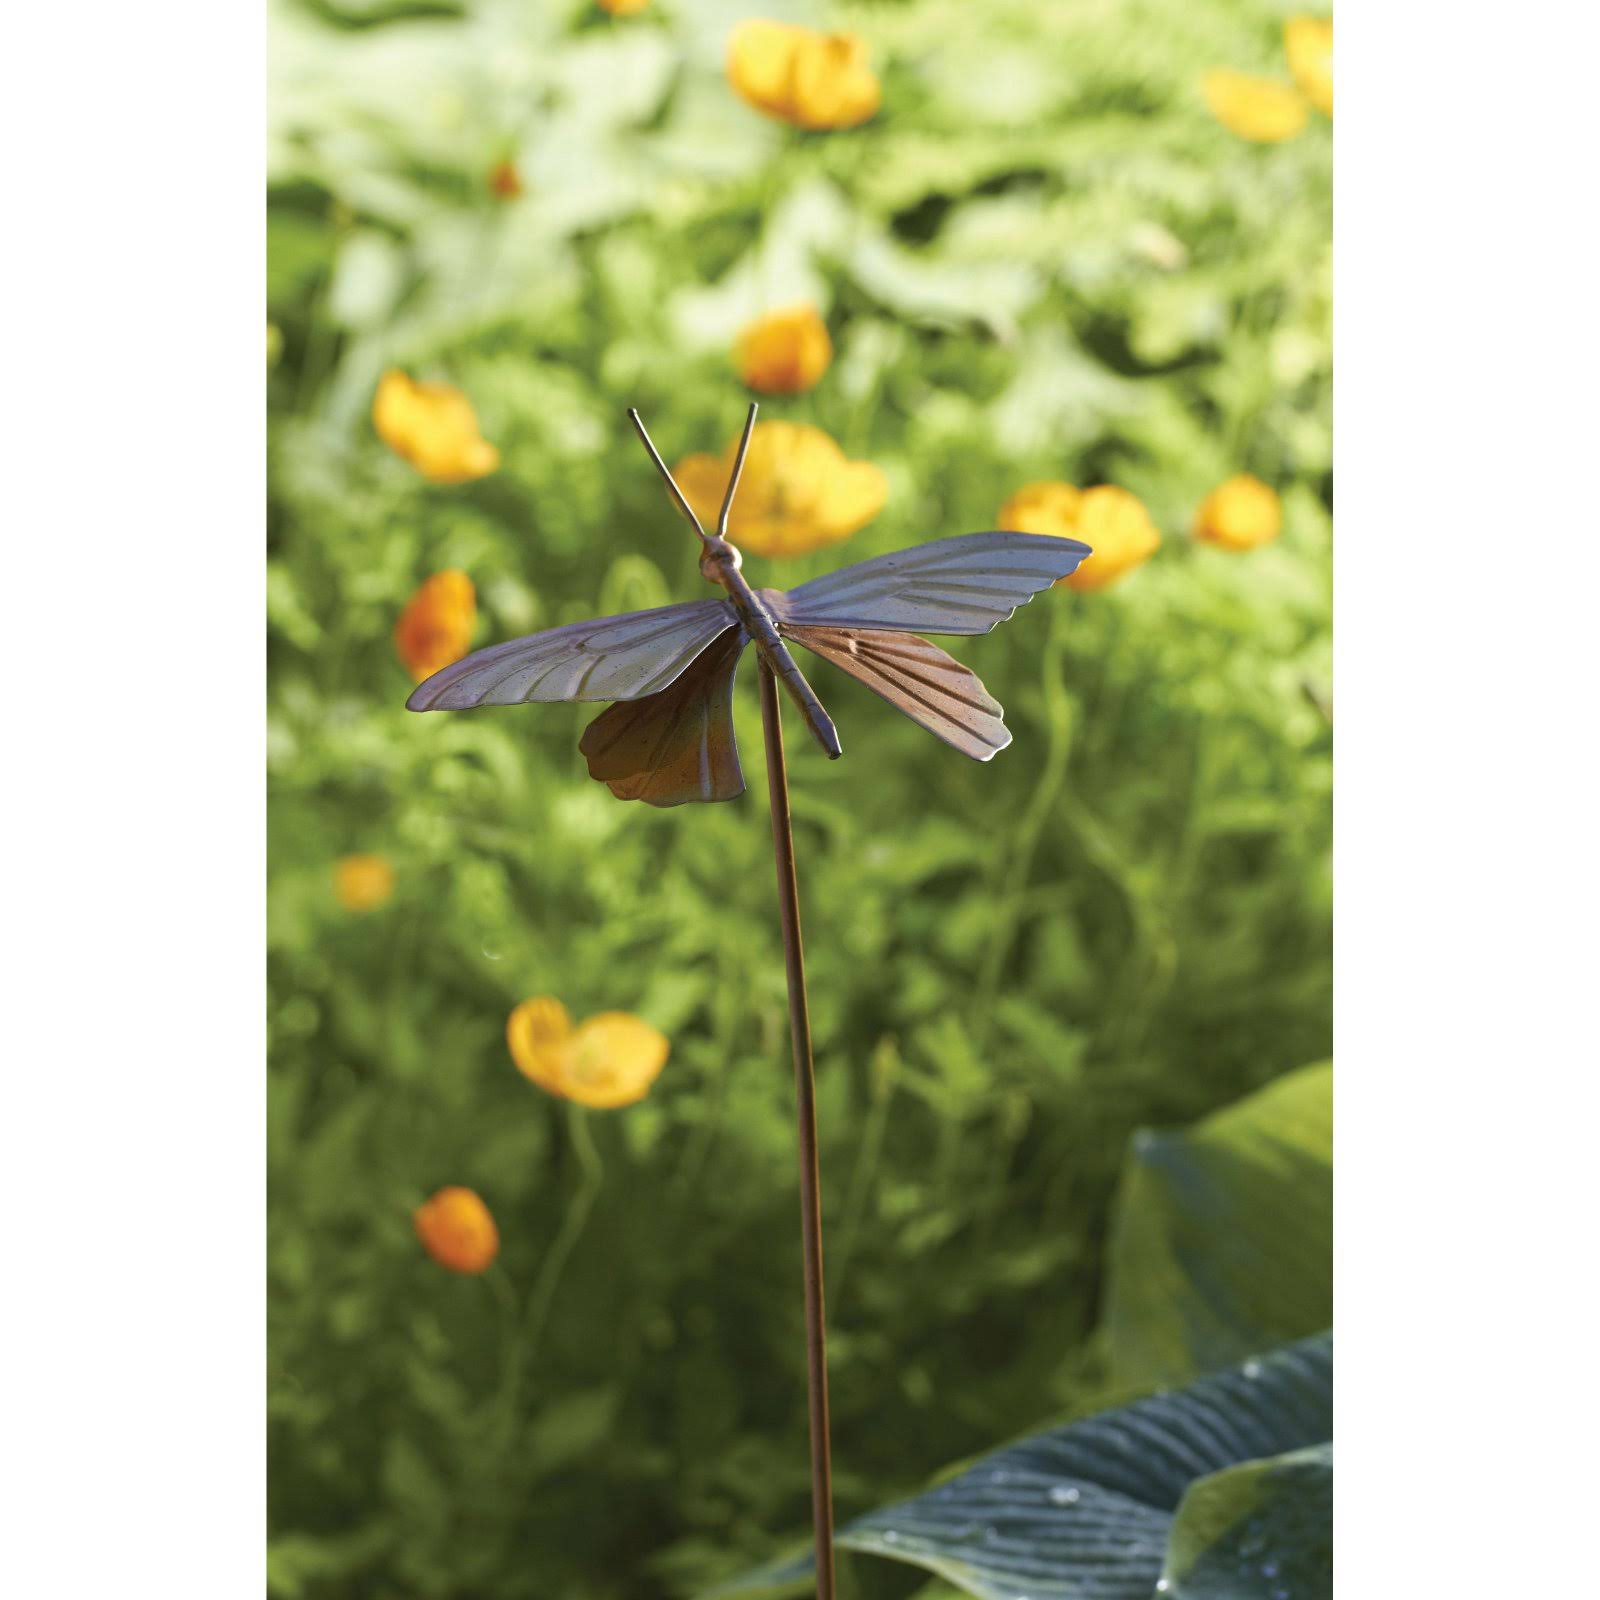 Ancient Graffiti Flamed Butterfly Garden Stake, 6.5 by 11cm by 70cm | Lawn & Garden